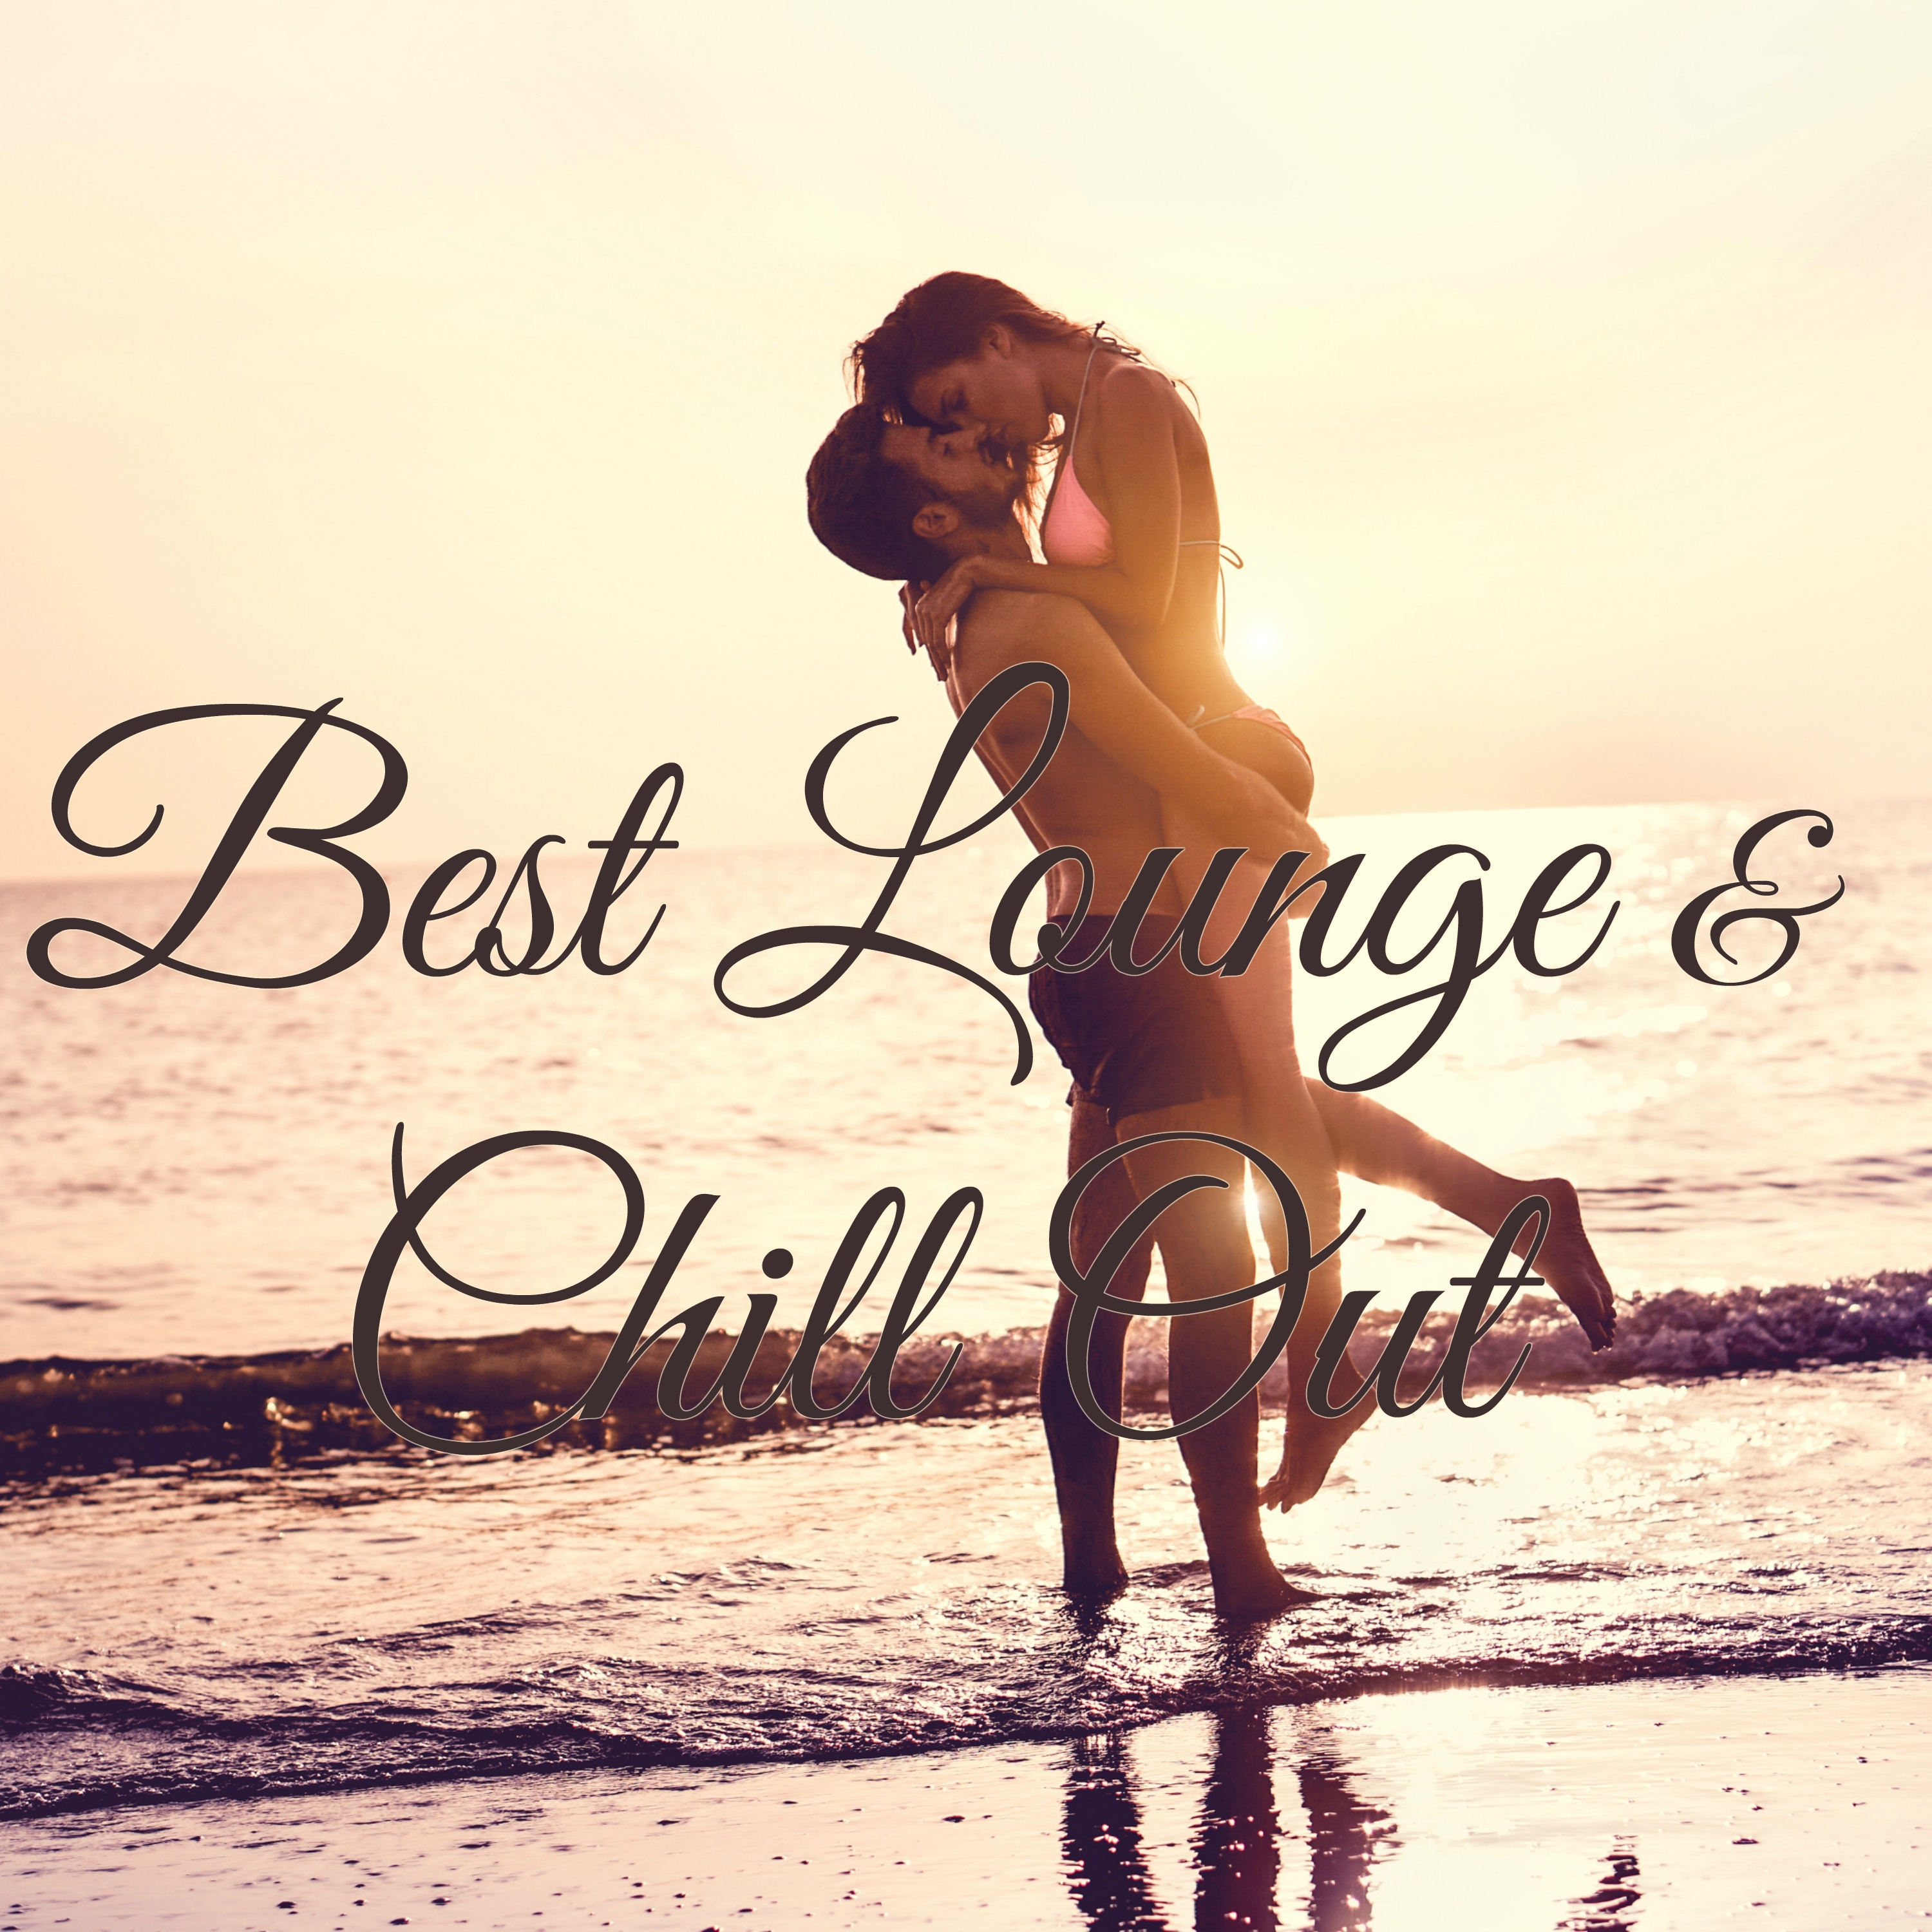 Kiss & more - Wonderfull Chillout for Love